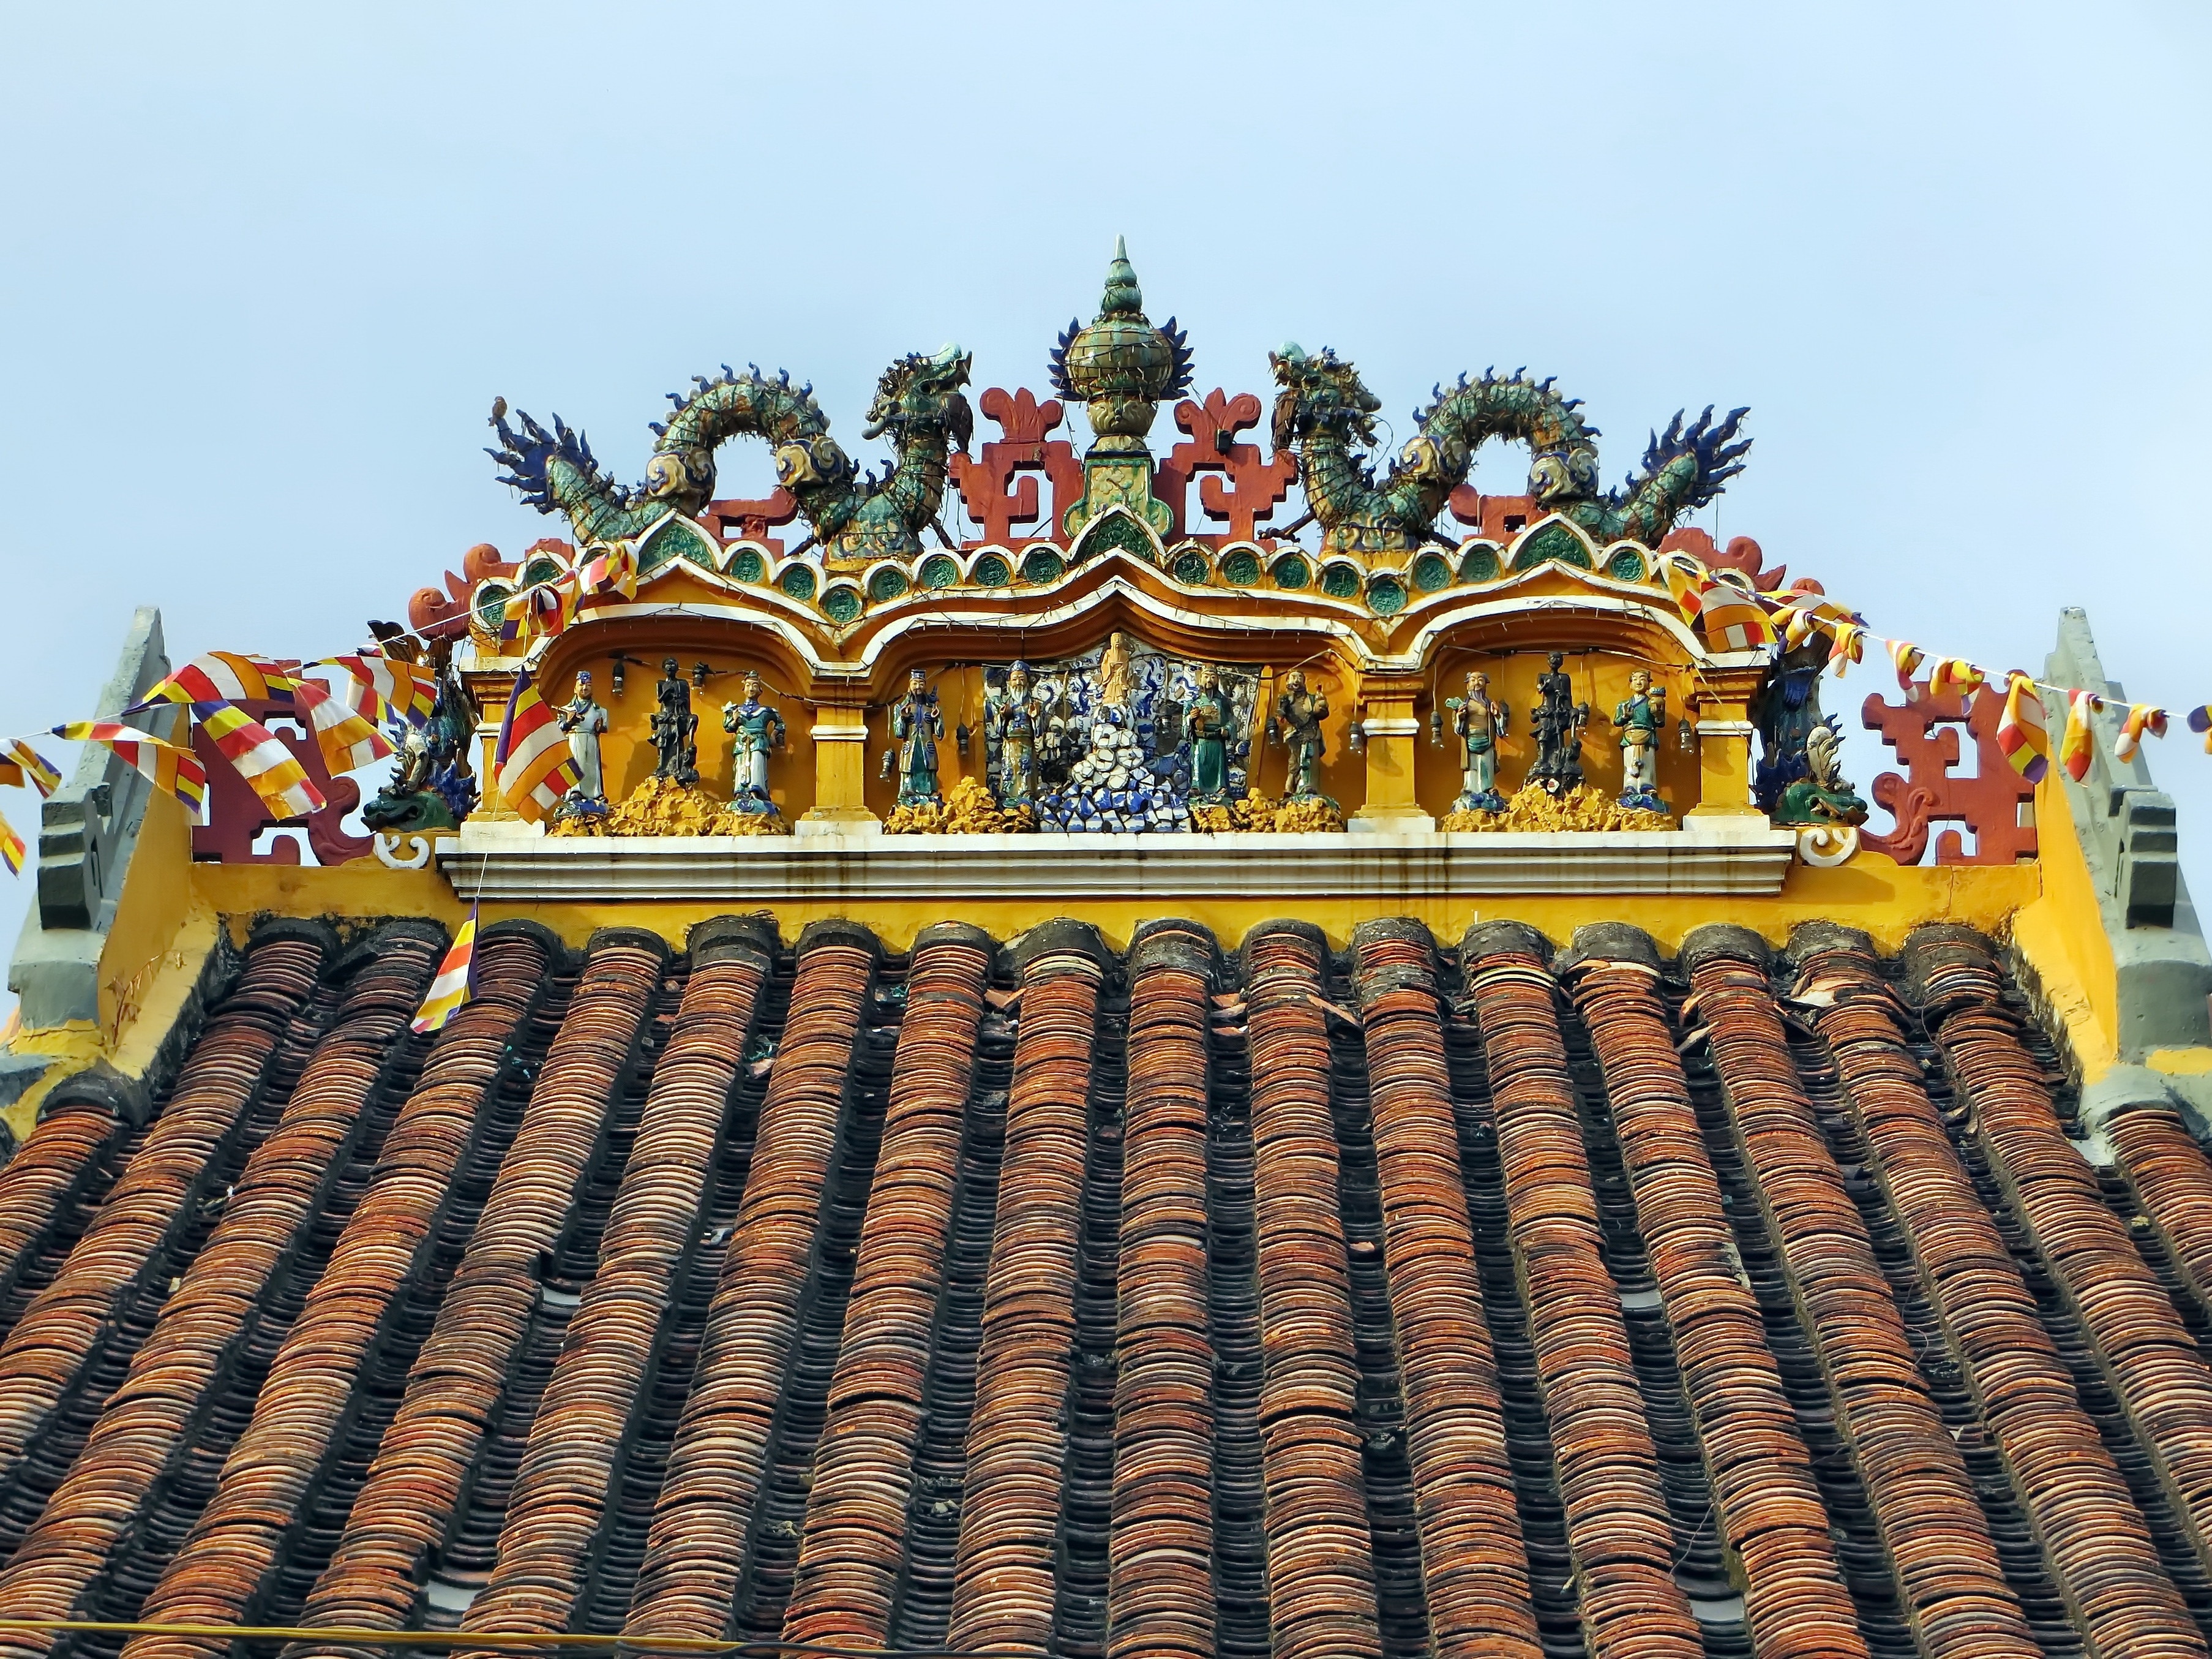 yellow and green dragon roof ornament